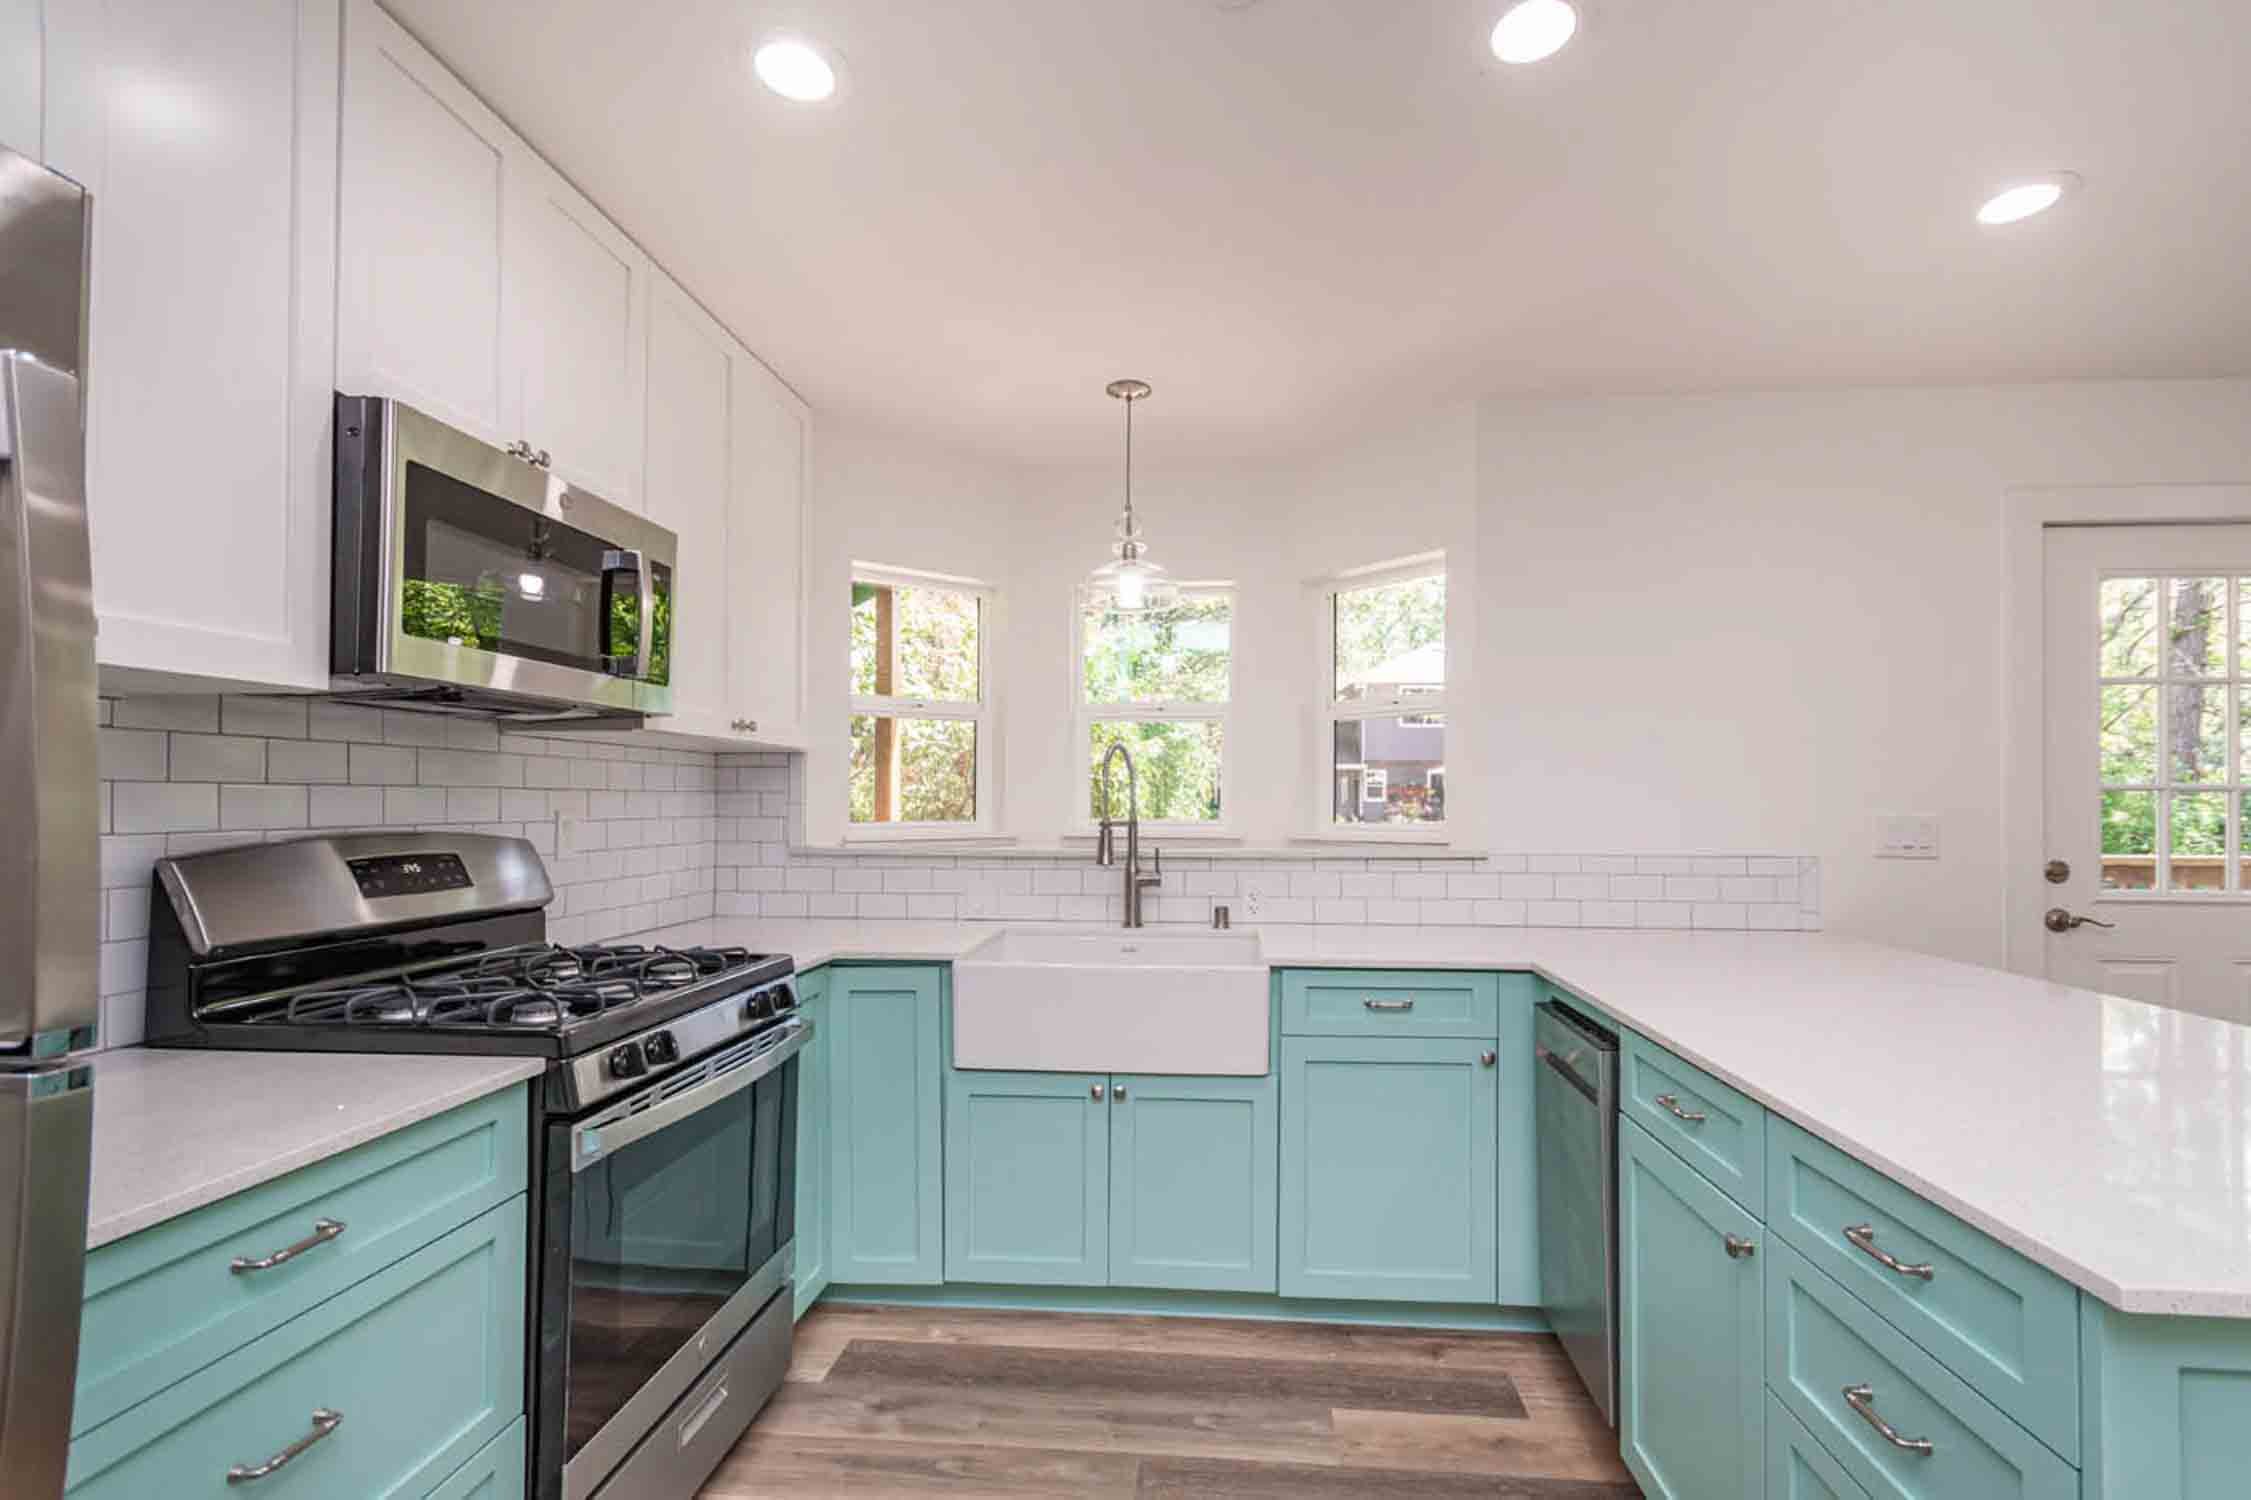  Tiny house companies and their project of a mint green kitchen in a home.